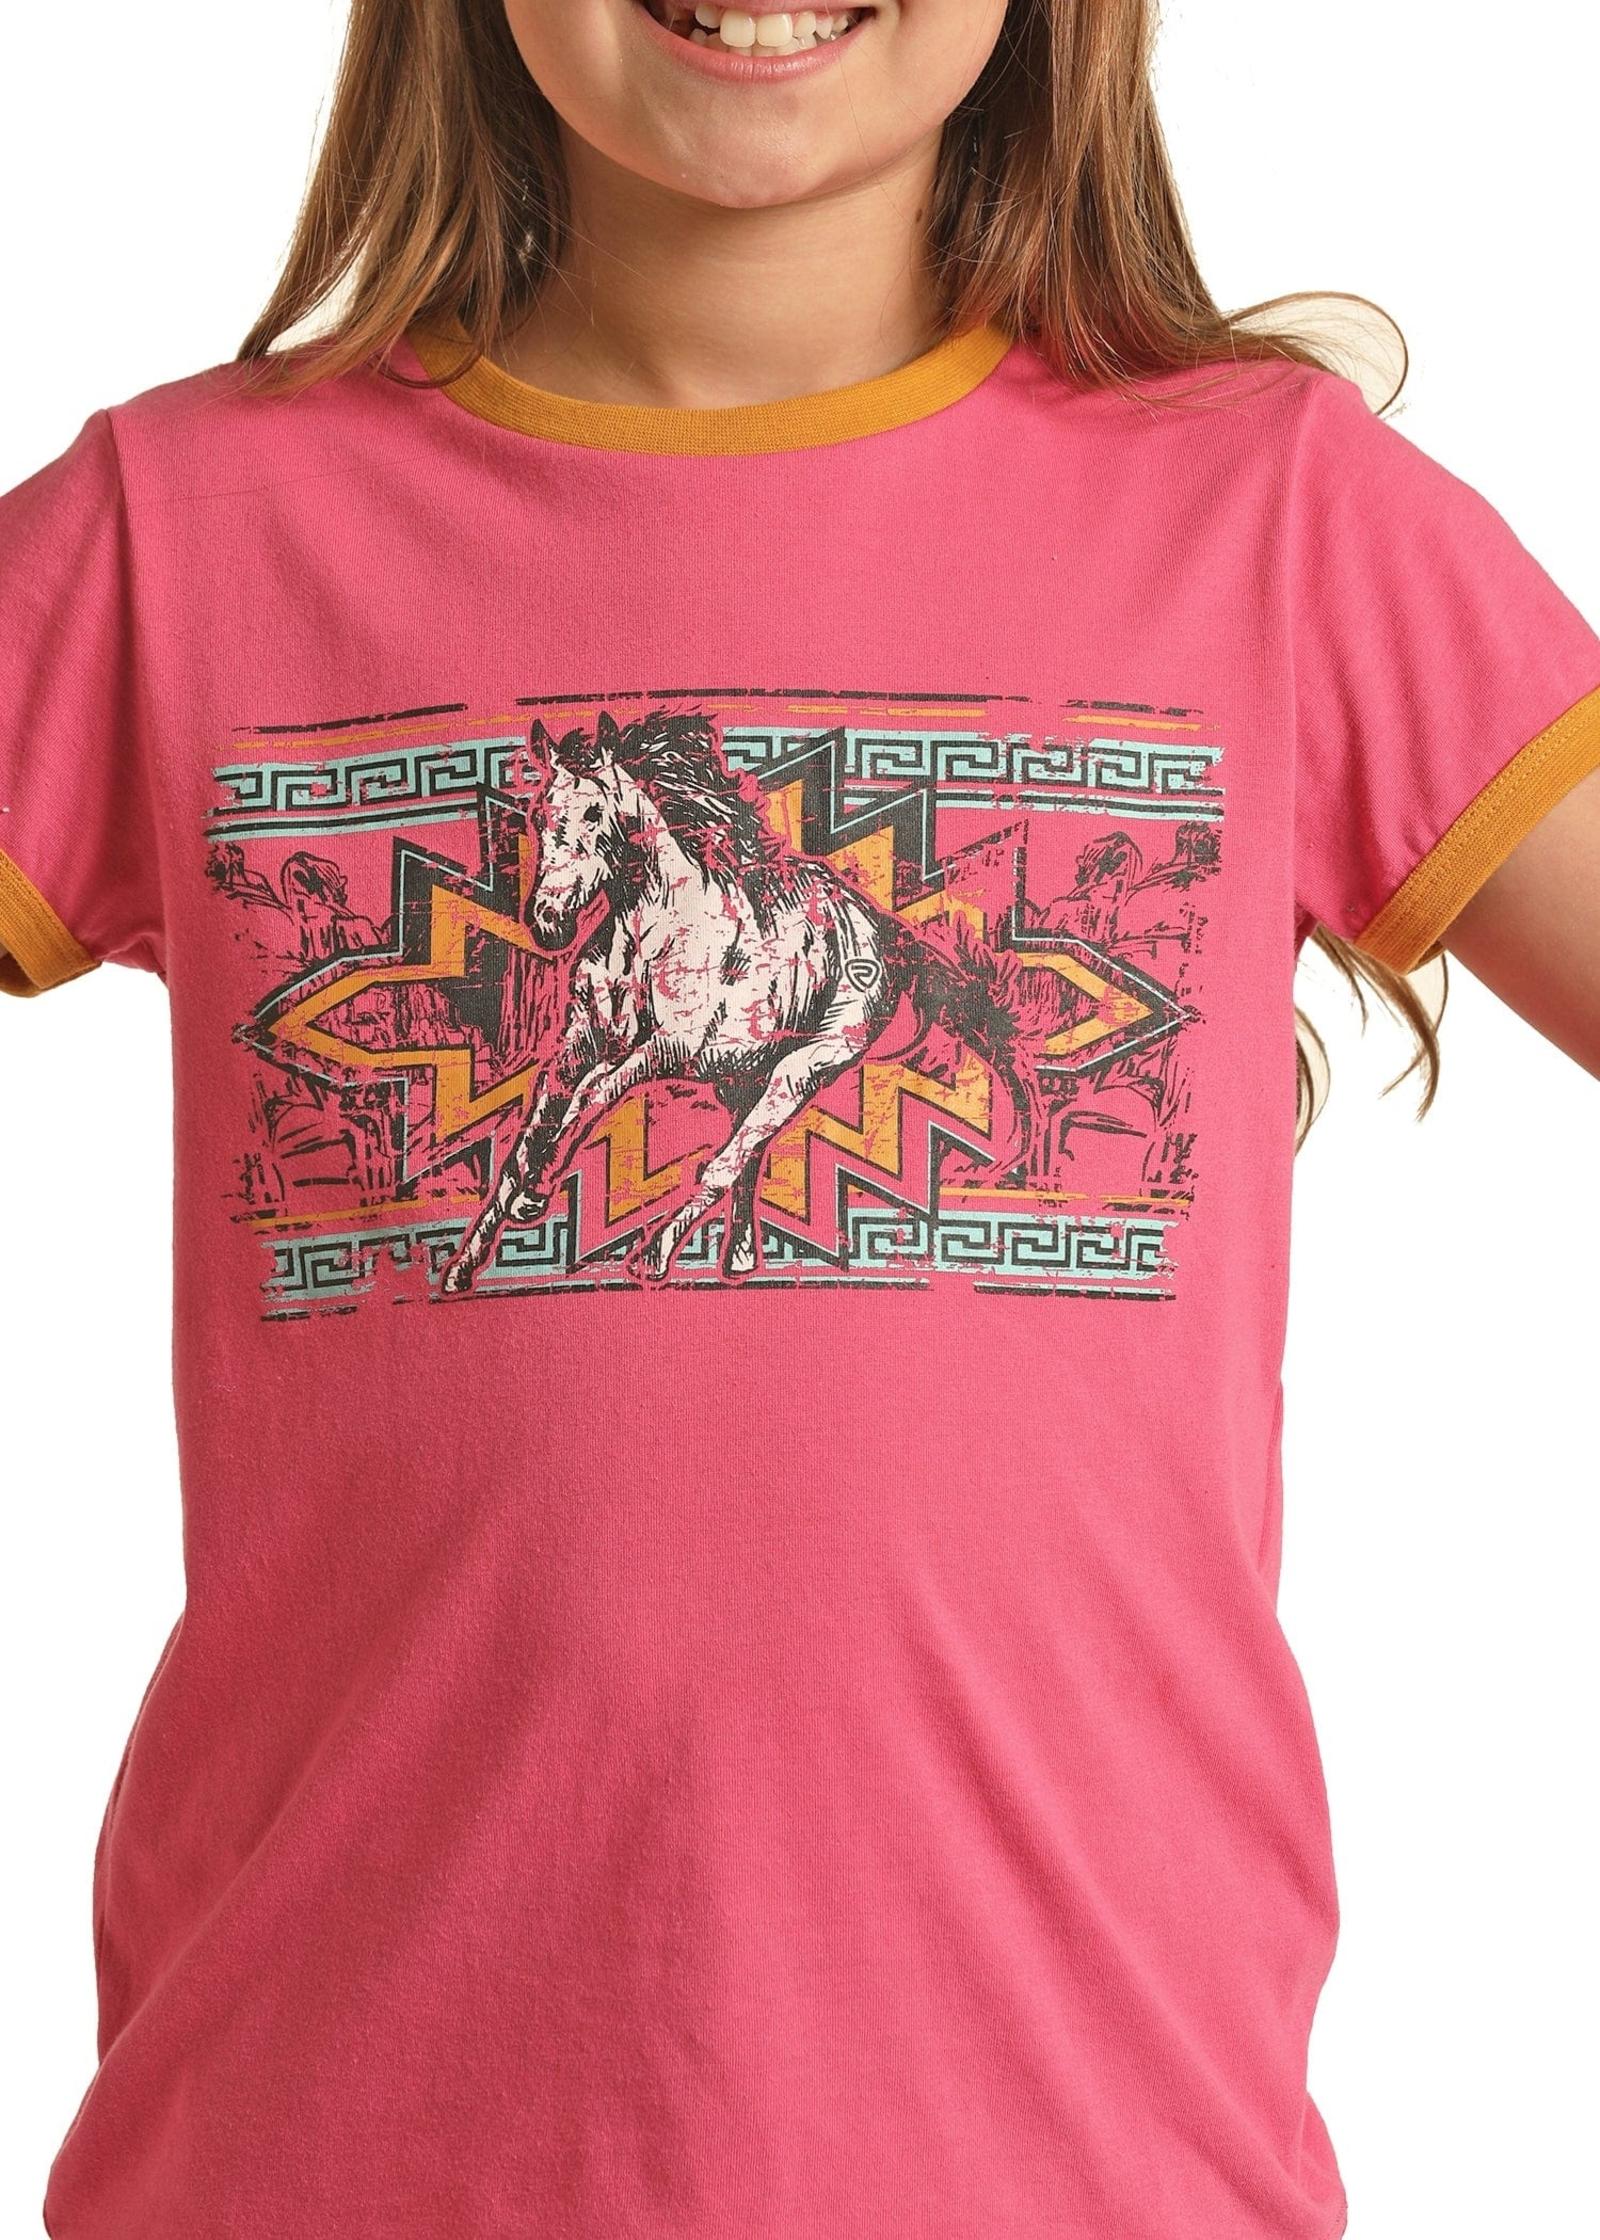 Rock & Roll Cowgirl Girl's Hot Pink Horse Short Sleeve Tee Detailed Graphic